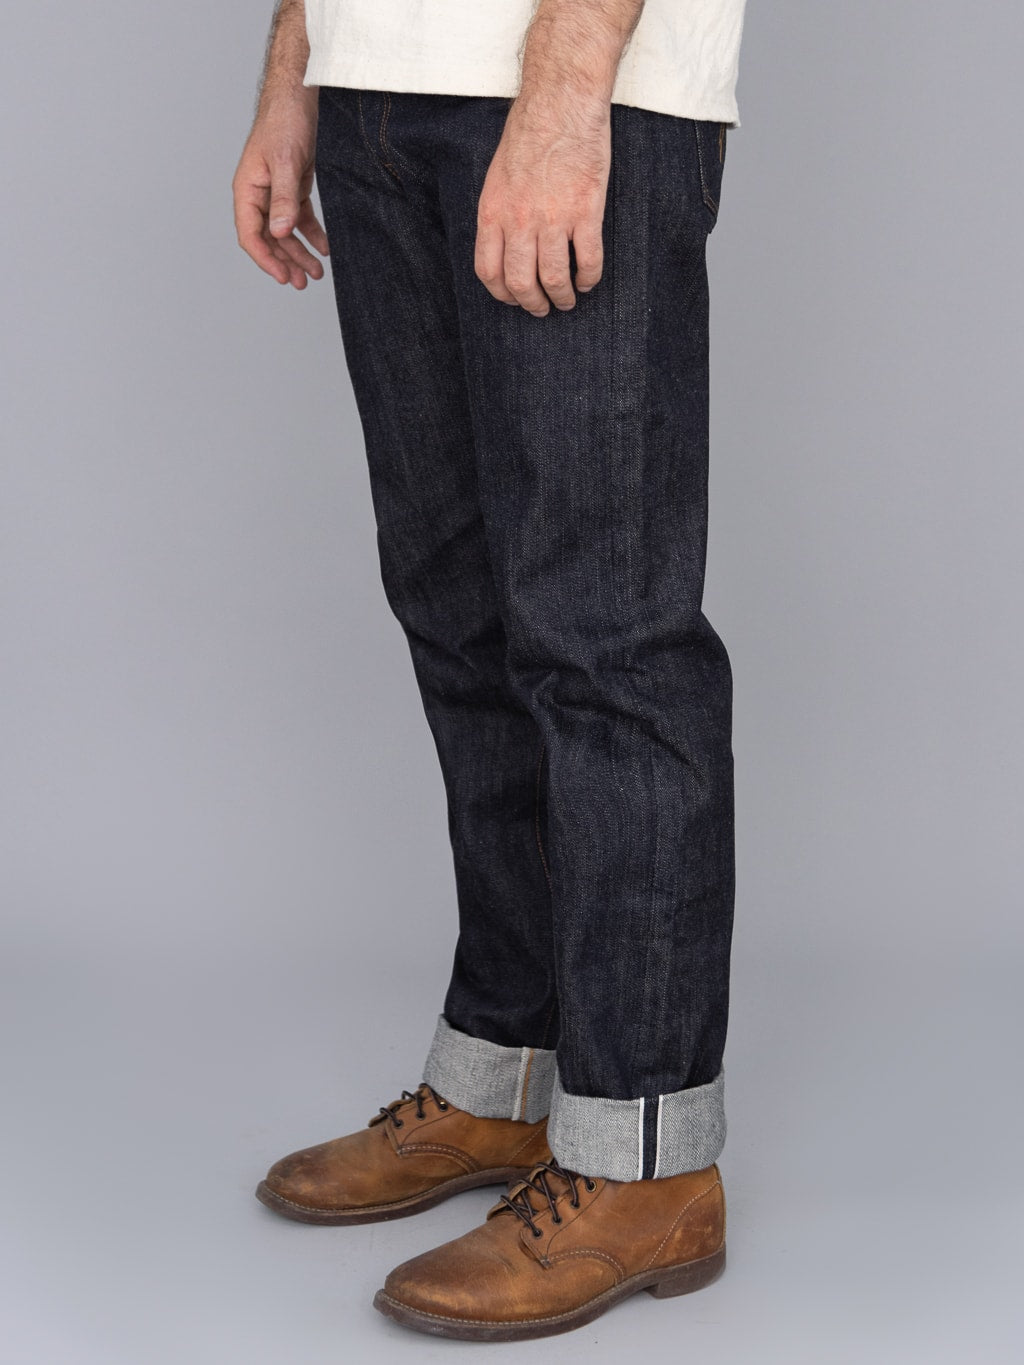 The Flat Head 3009 14.5oz straight tapered Jeans side